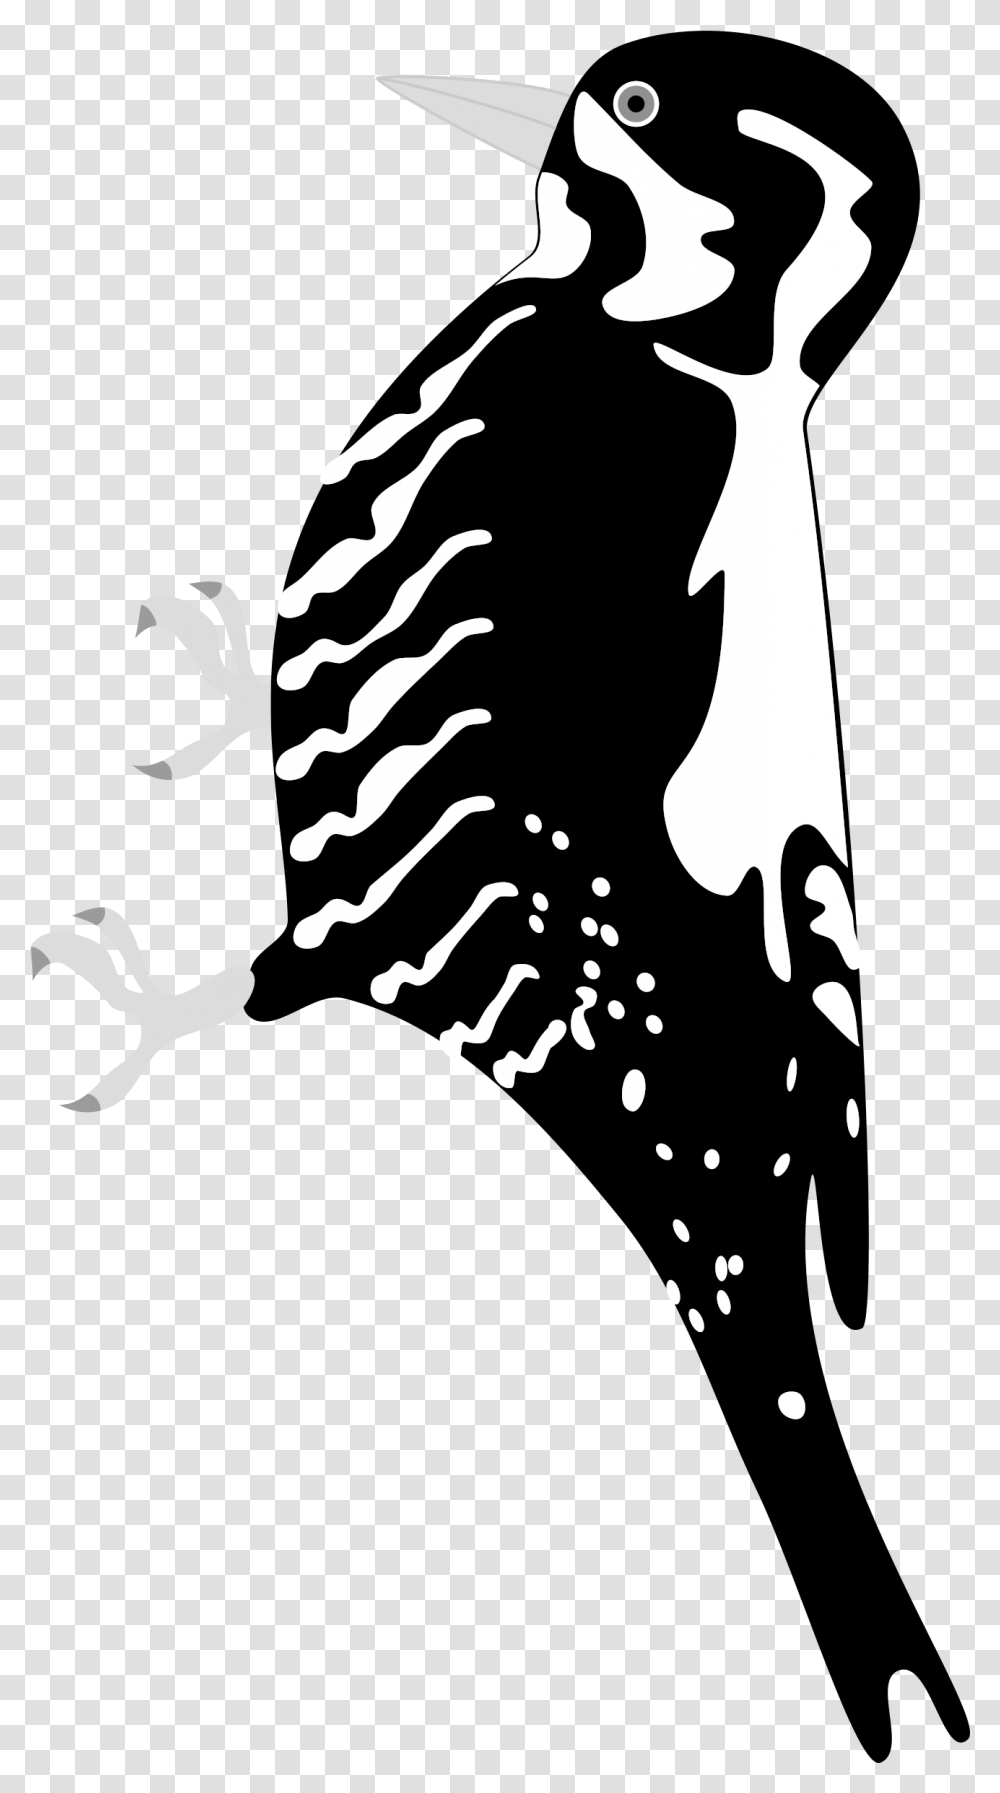 This Free Icons Design Of Three Toed Woodpecker Full Woodpecker On Tree, Stencil, Silhouette, Hand, Art Transparent Png